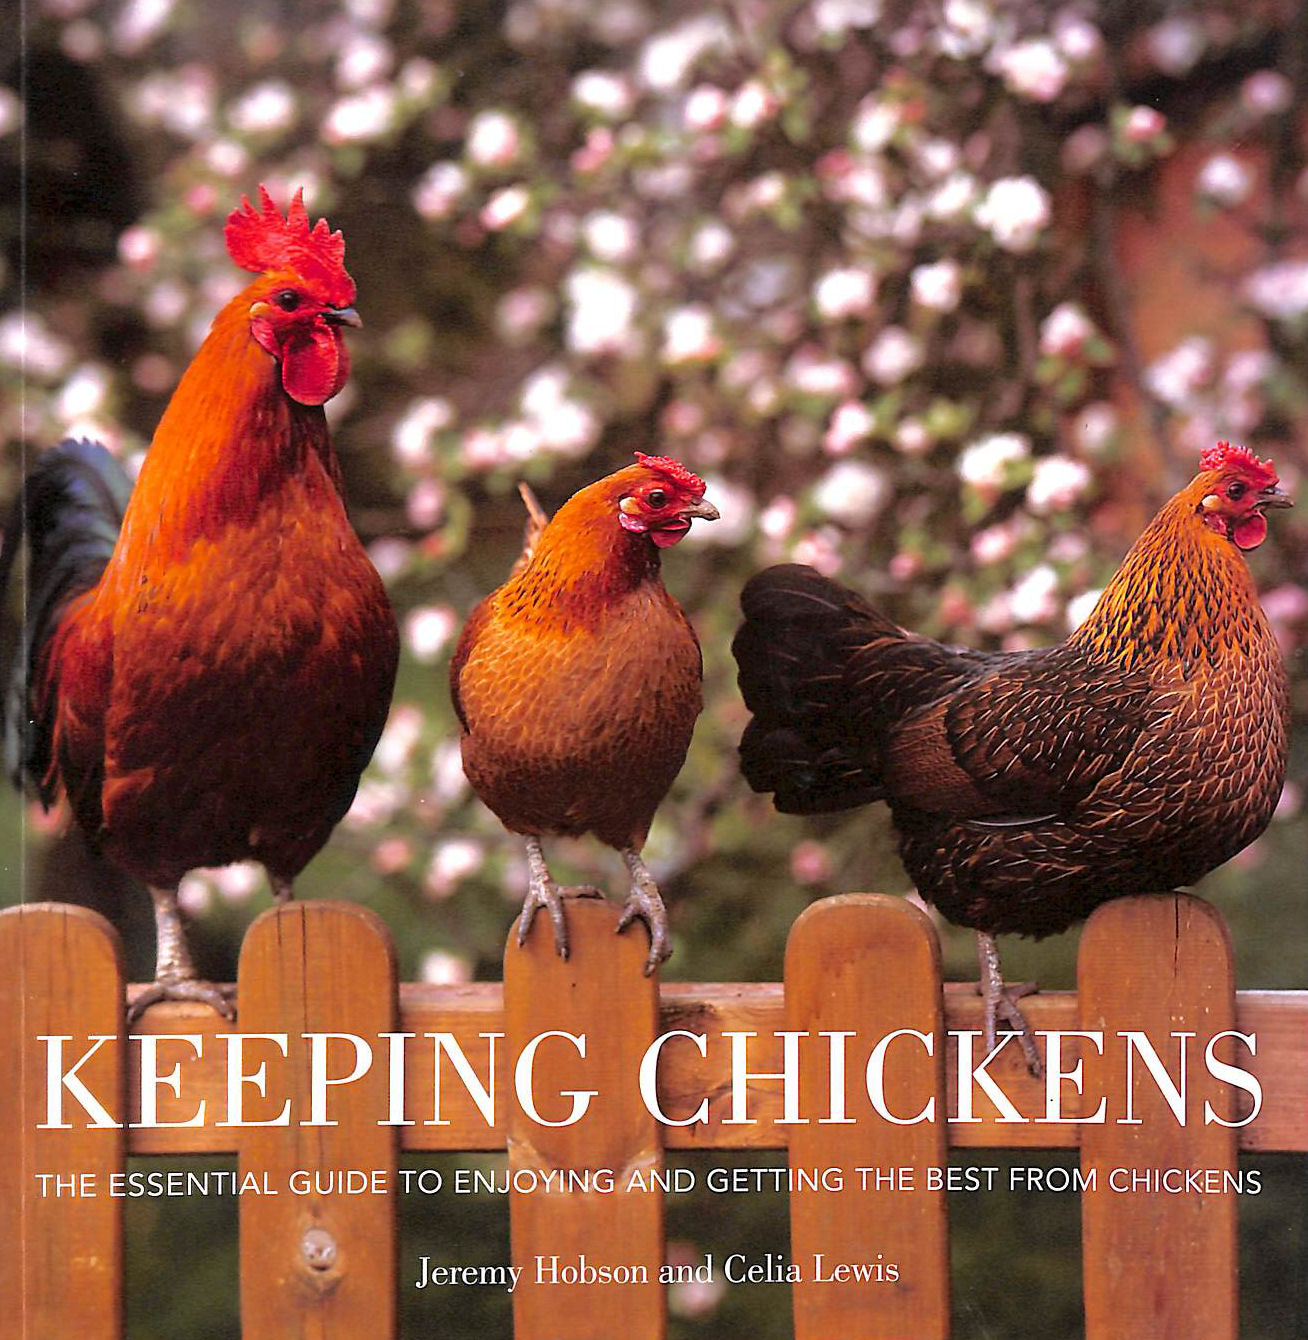 JEREMY HOBSON; CELIA LEWIS - Keeping Chickens: The Essential Guide to Enjoying and Getting the Best from Chickens